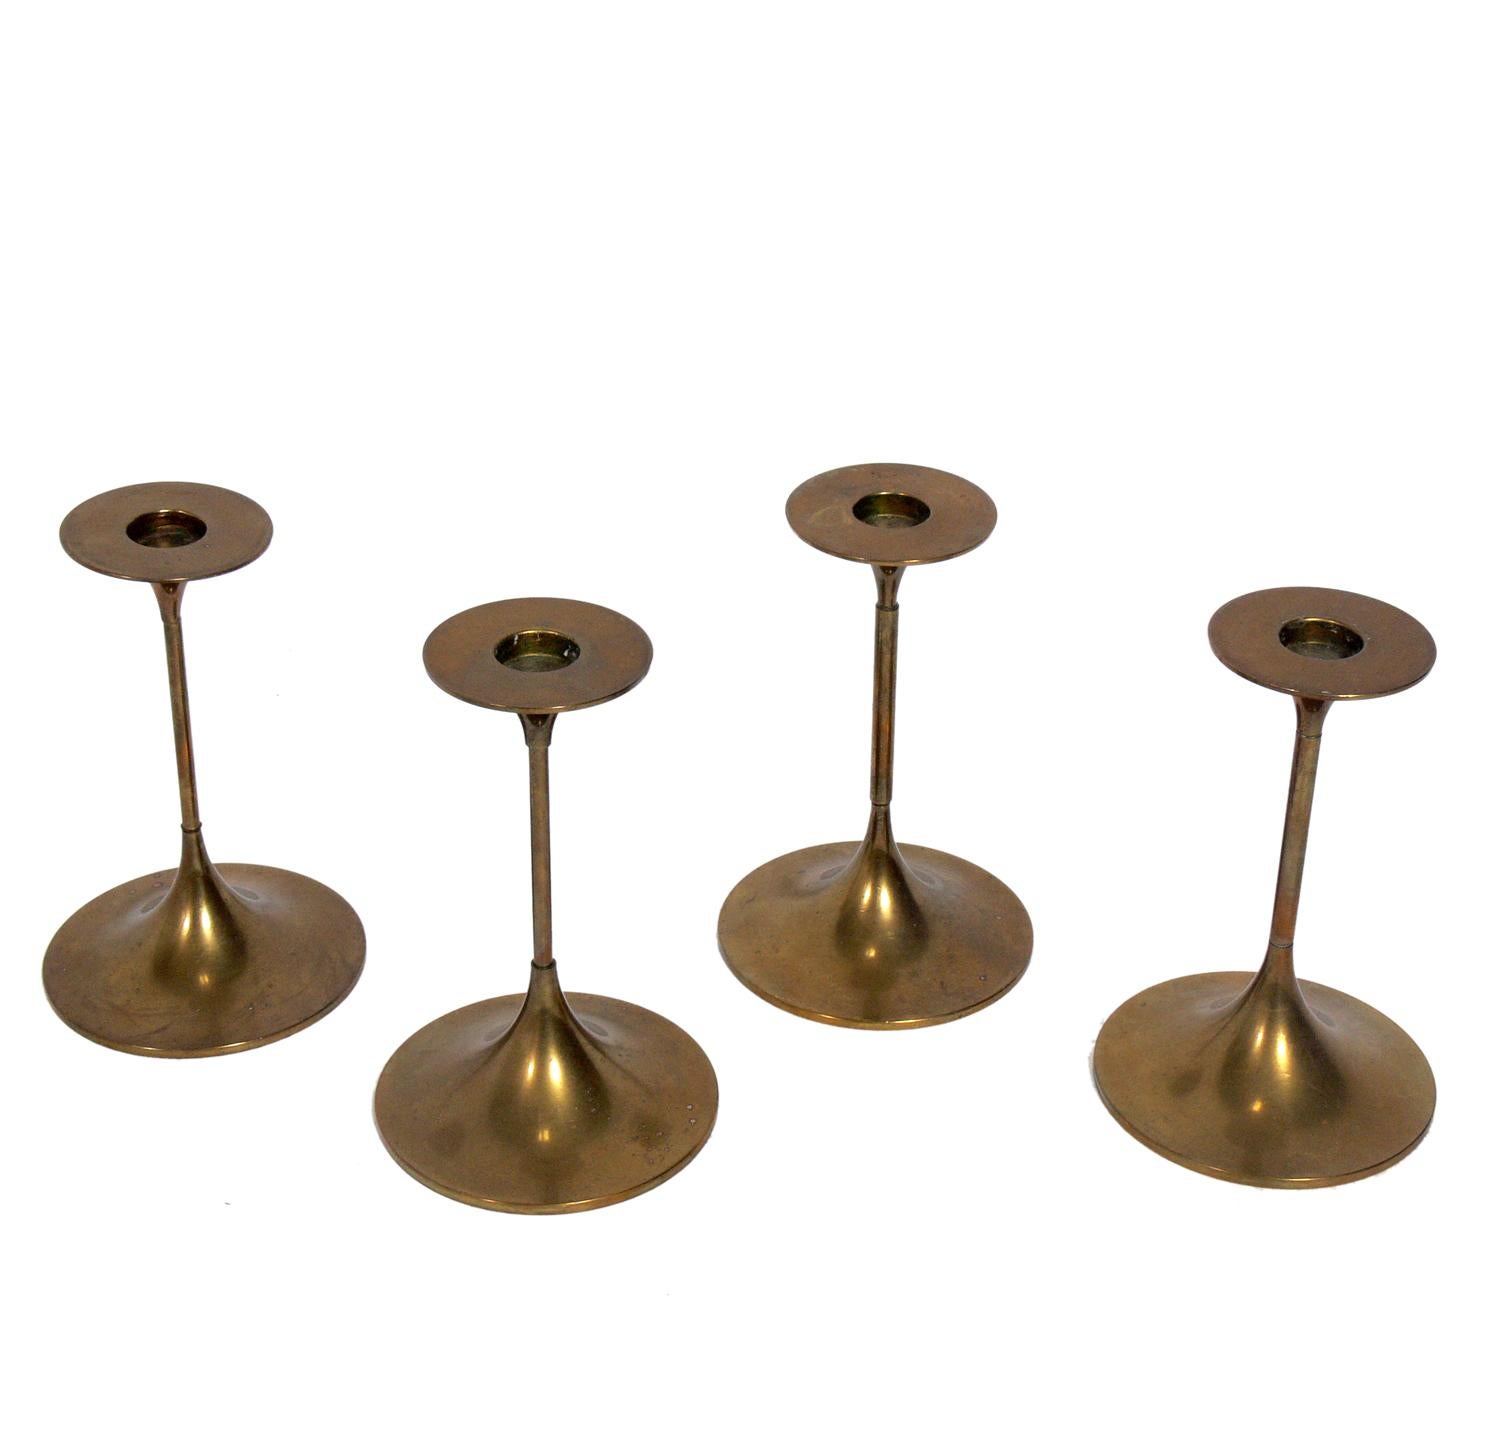 Danish modern brass candlesticks, designed by Max Bruel for Torben Orskov, Denmark, circa 1960s. They retain their warm original patina. They are priced at $175 each.